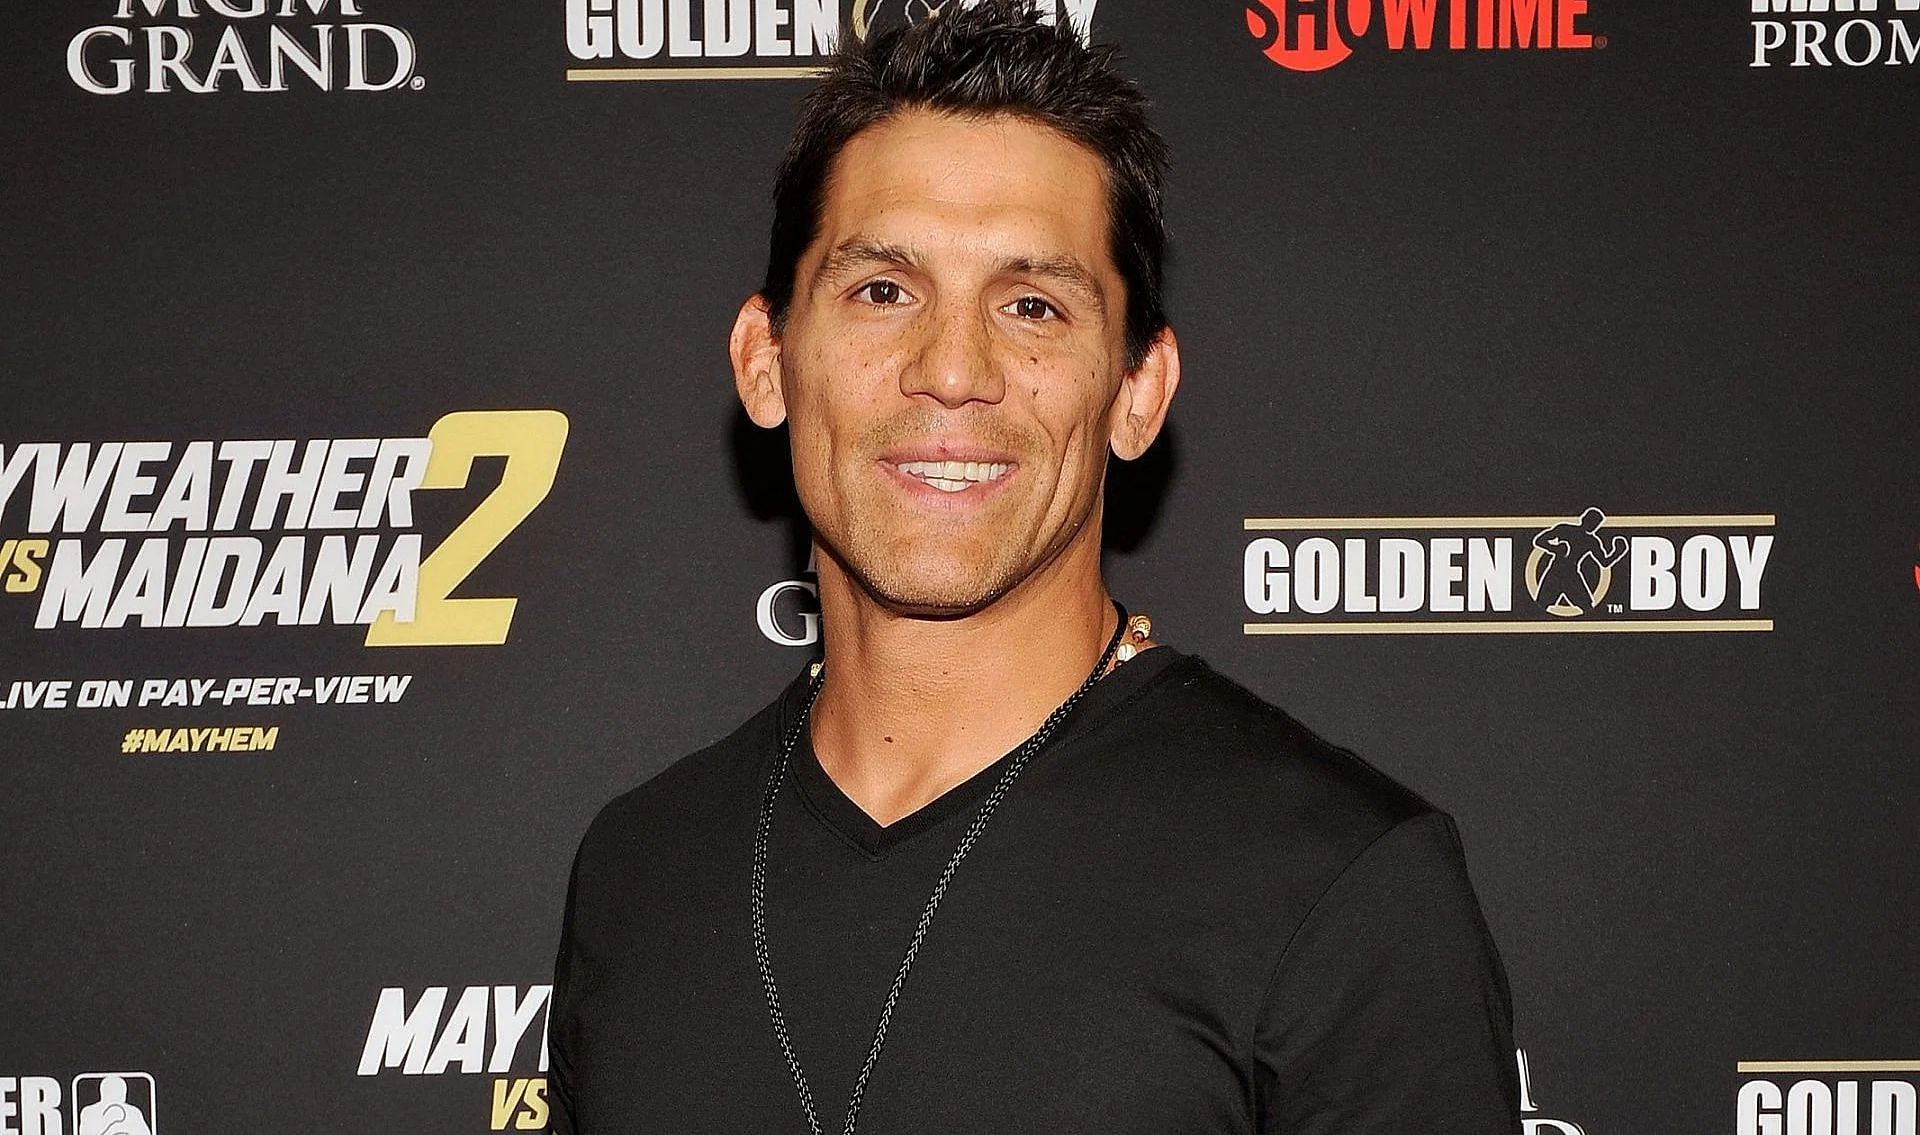 Frank Shamrock left the octagon at the peak of his powers, but when he returned, it was elsewhere